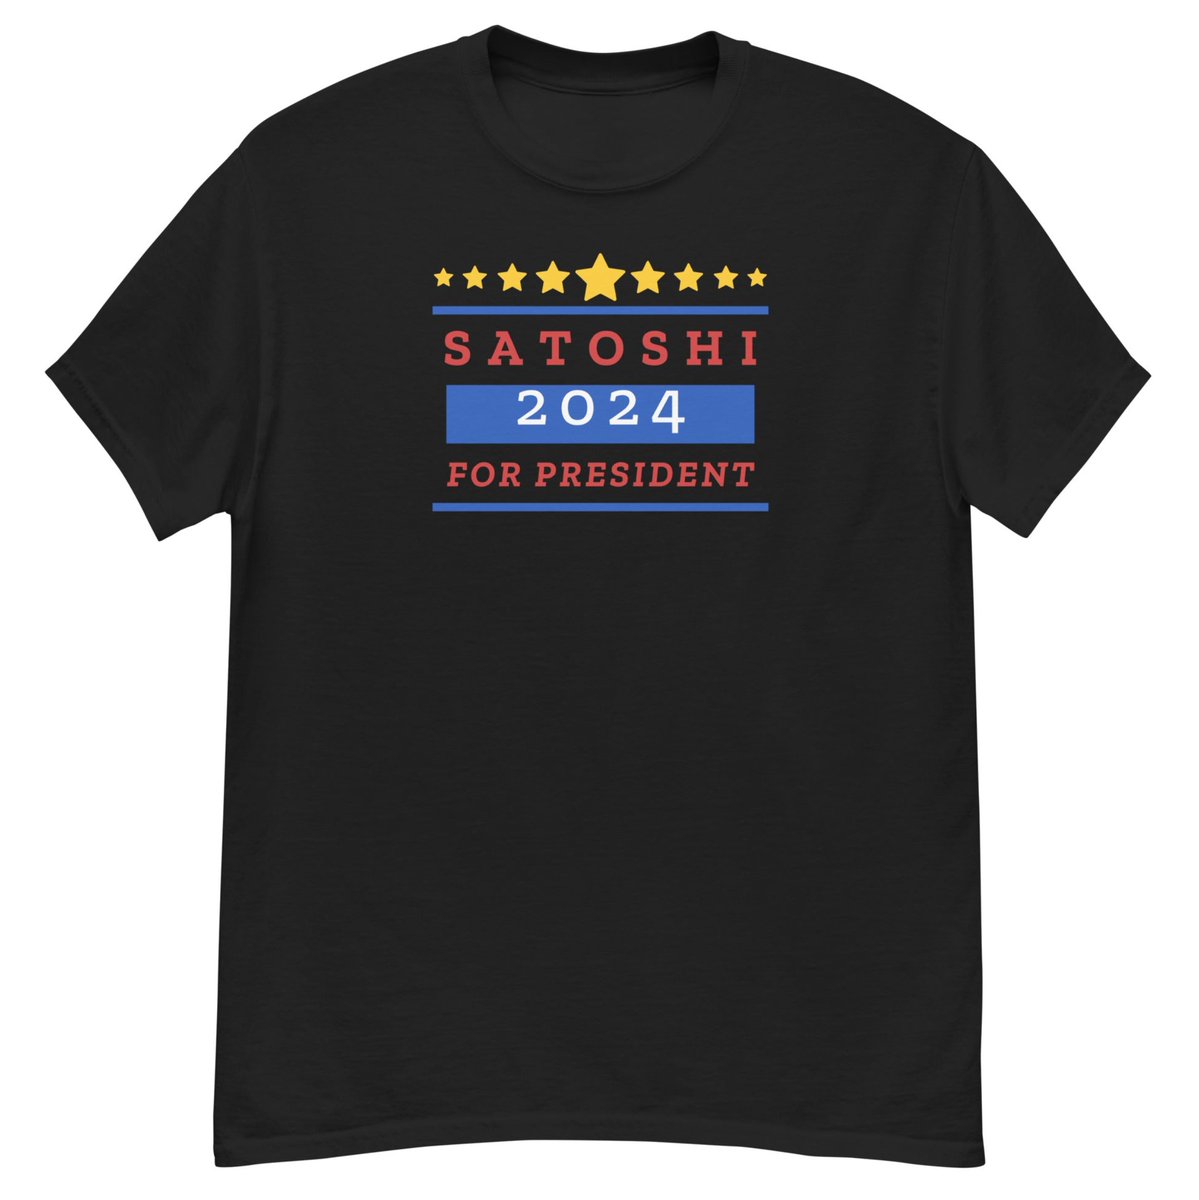 First US Presidential Campaign in the W3BC Merch Shop... 

Satoshi for President 2024 

Check out the shop here: 
web3breakfast.com/merch 

I am adding new items daily. If you are part of a project and want custom merch options for your community, dm me or email…